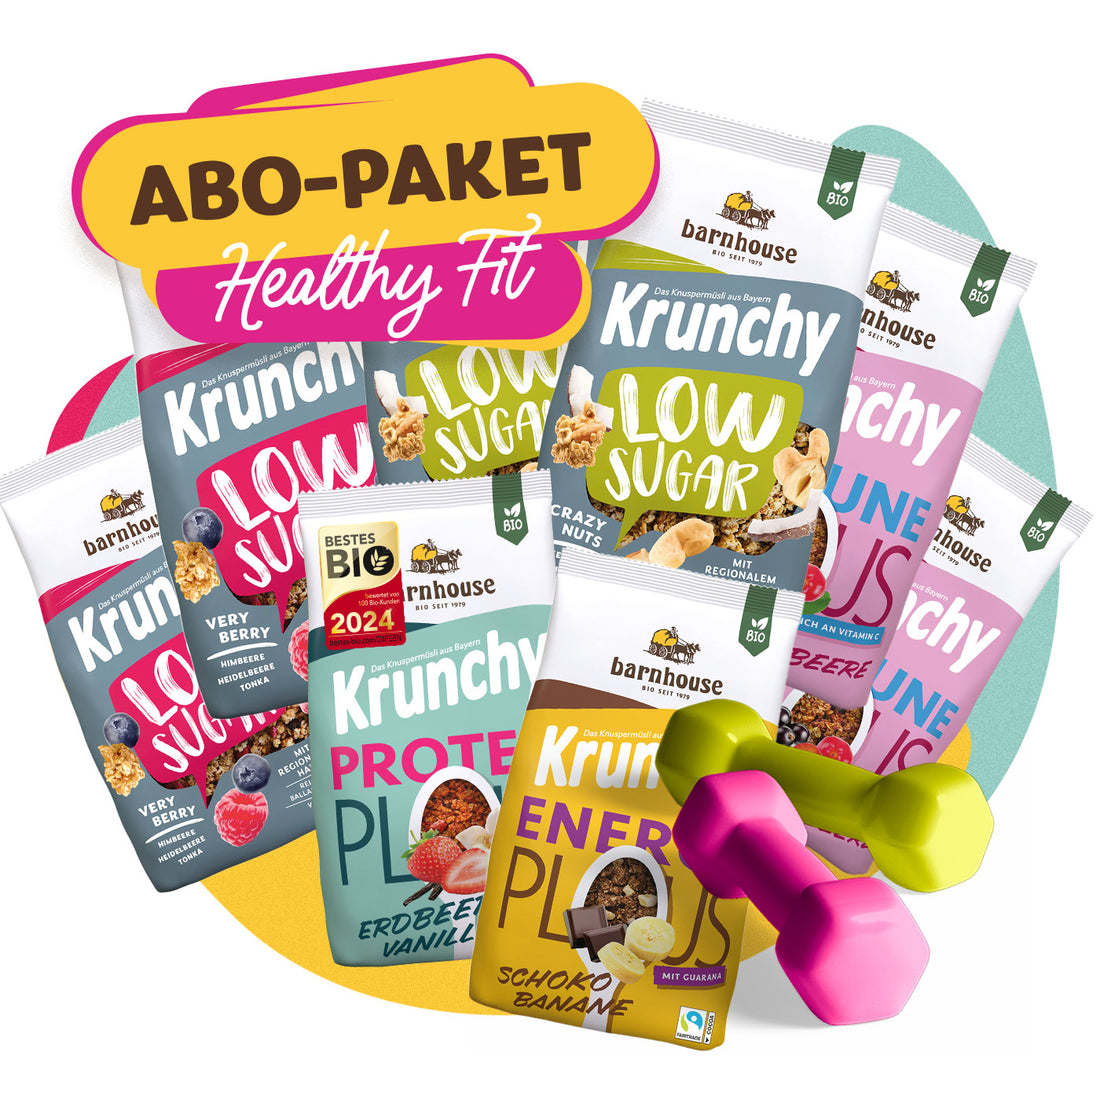 Abo-Paket Healthy Fit